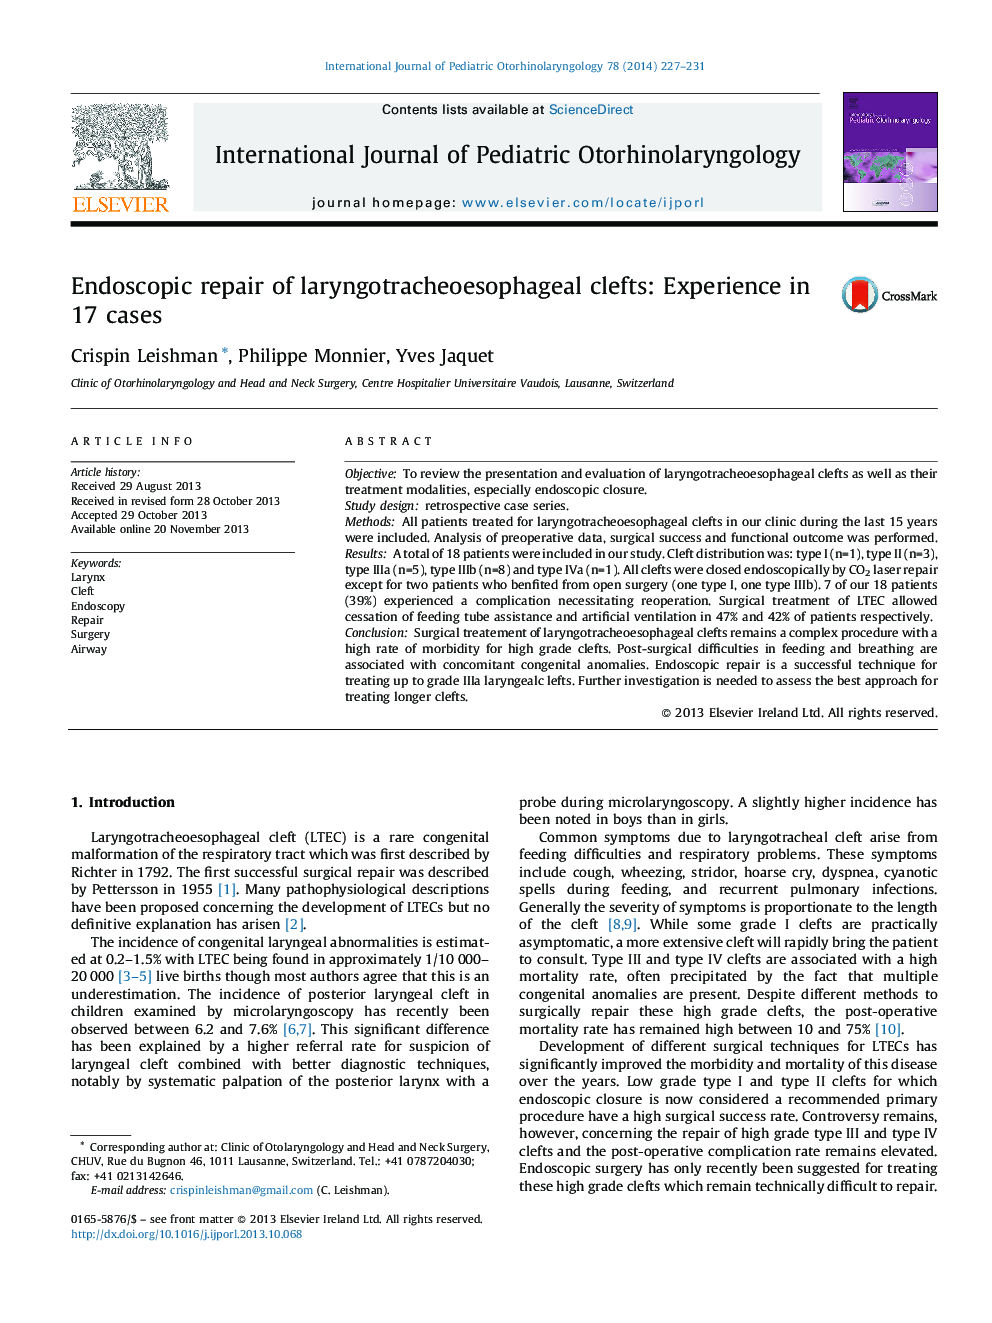 Endoscopic repair of laryngotracheoesophageal clefts: Experience in 17 cases